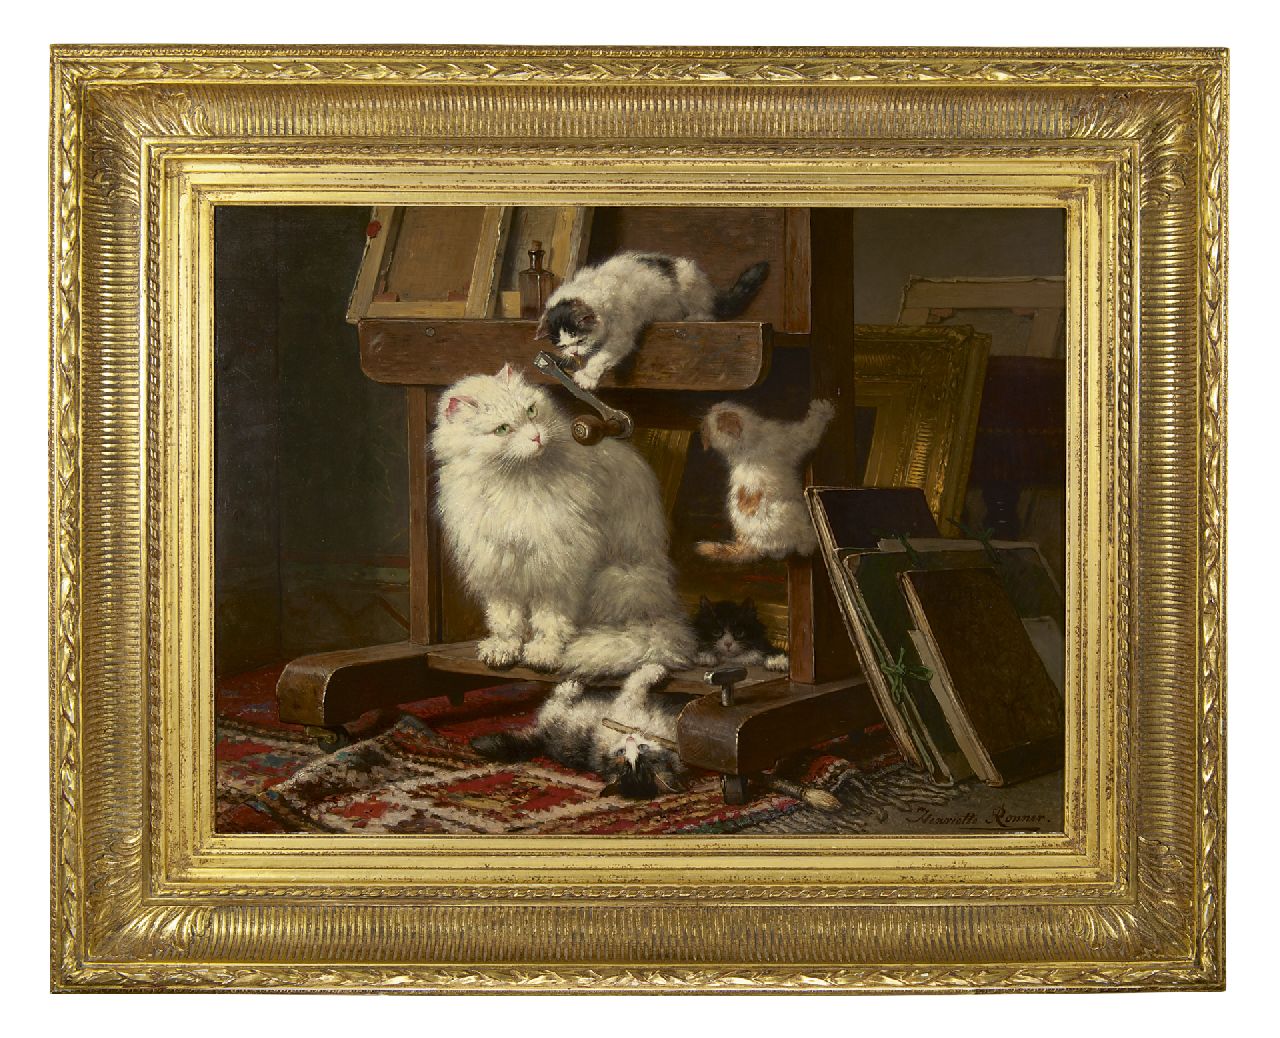 Ronner-Knip H.  | Henriette Ronner-Knip, Cat and her kittens in a painter's studio, oil on panel 54.5 x 72.0 cm, gesigneerd rechtsonder and dated 1878